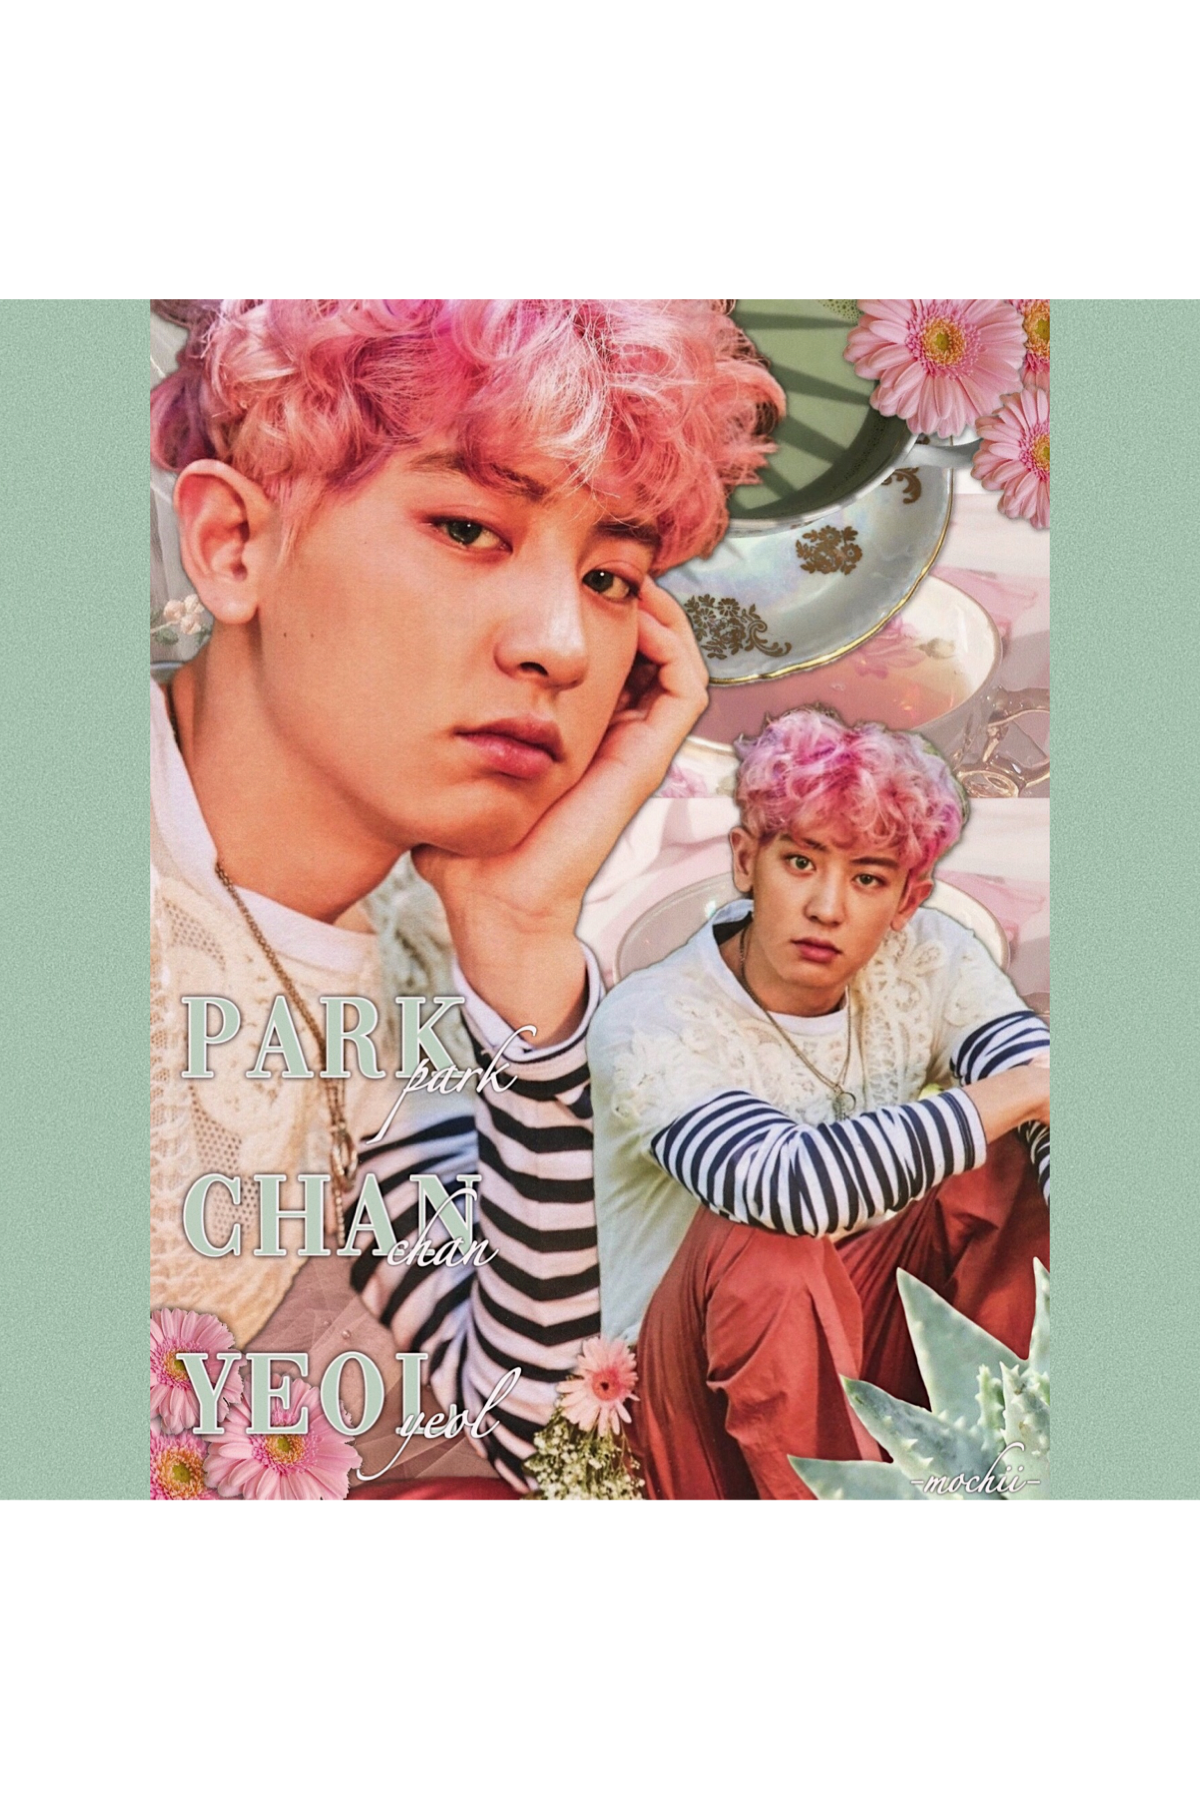 🍵tap for announcement🍵
- you are beautiful and special -
i don't know how to feel about this edit...thoughts?
shoutout to @piink_angel, she is my smol one. ùwú